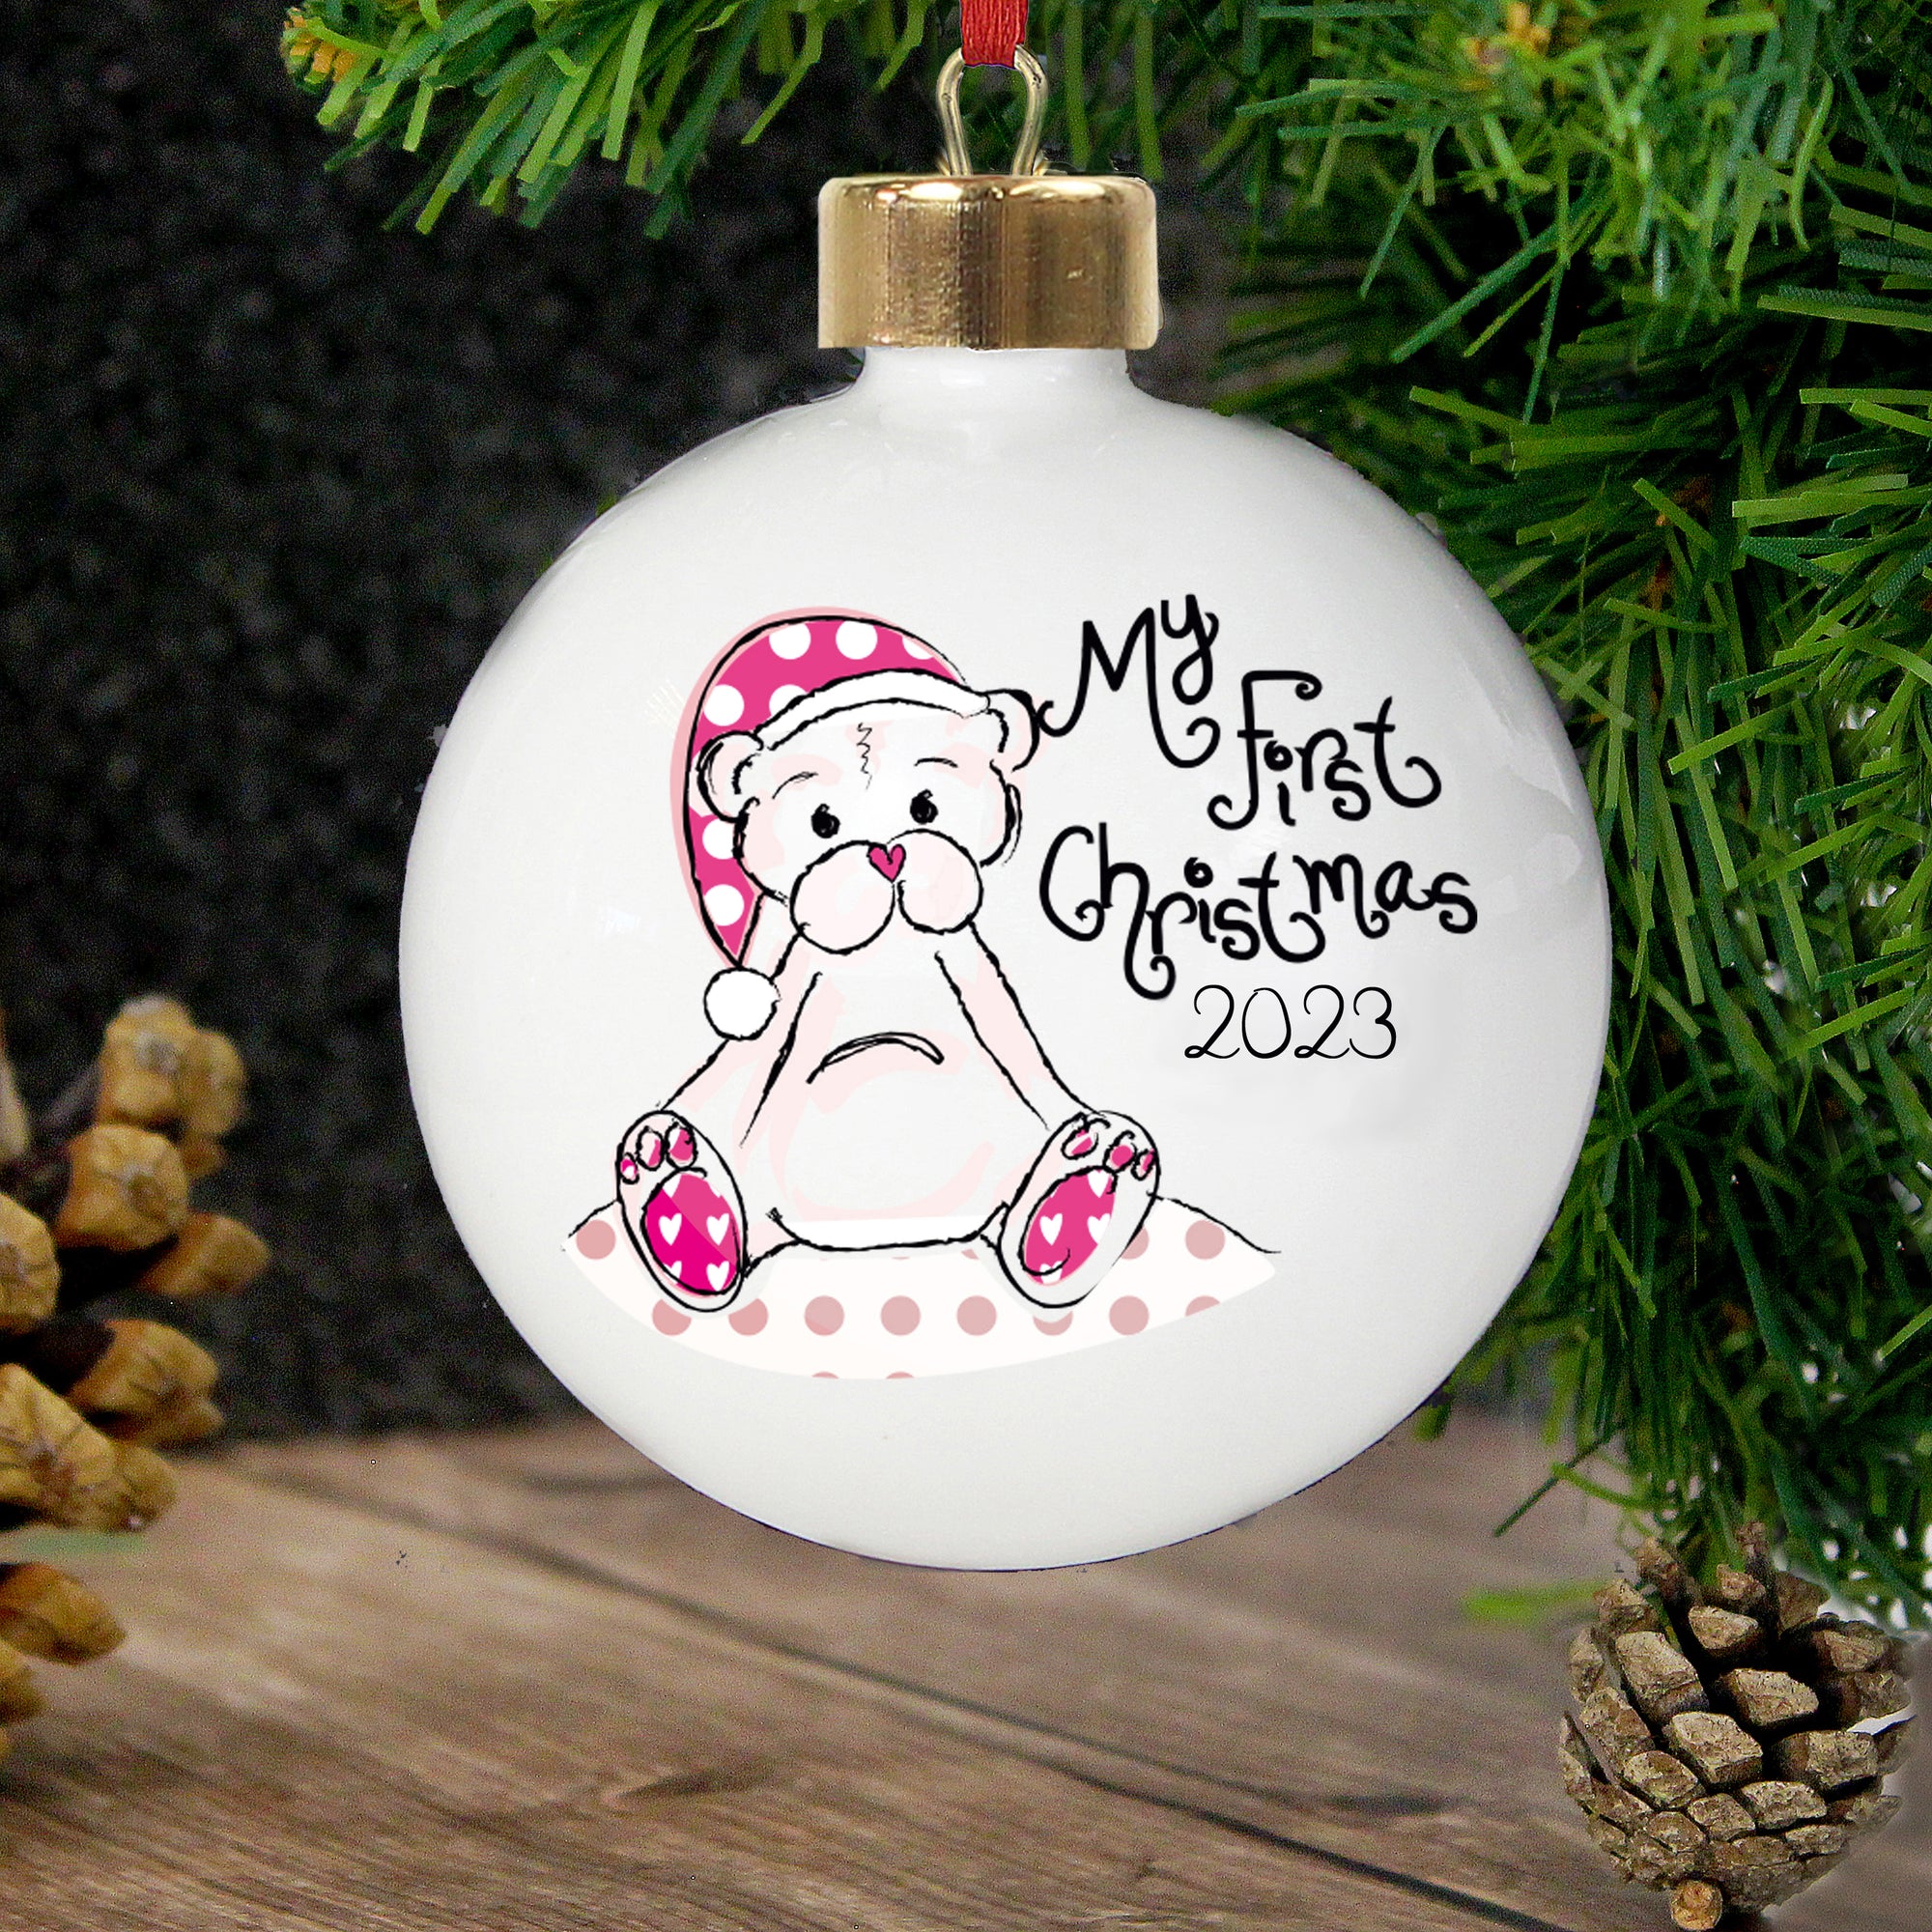 Personalised 'My First Christmas' bauble featuring an image of a hand-drawn bear wearing a Christmas hat on the front of the bauble with the wording 'My First Christmas'. You can also add a year of your choice to the front of the bauble and the rear can be personalised with a message of your choice over up to 4 lines.